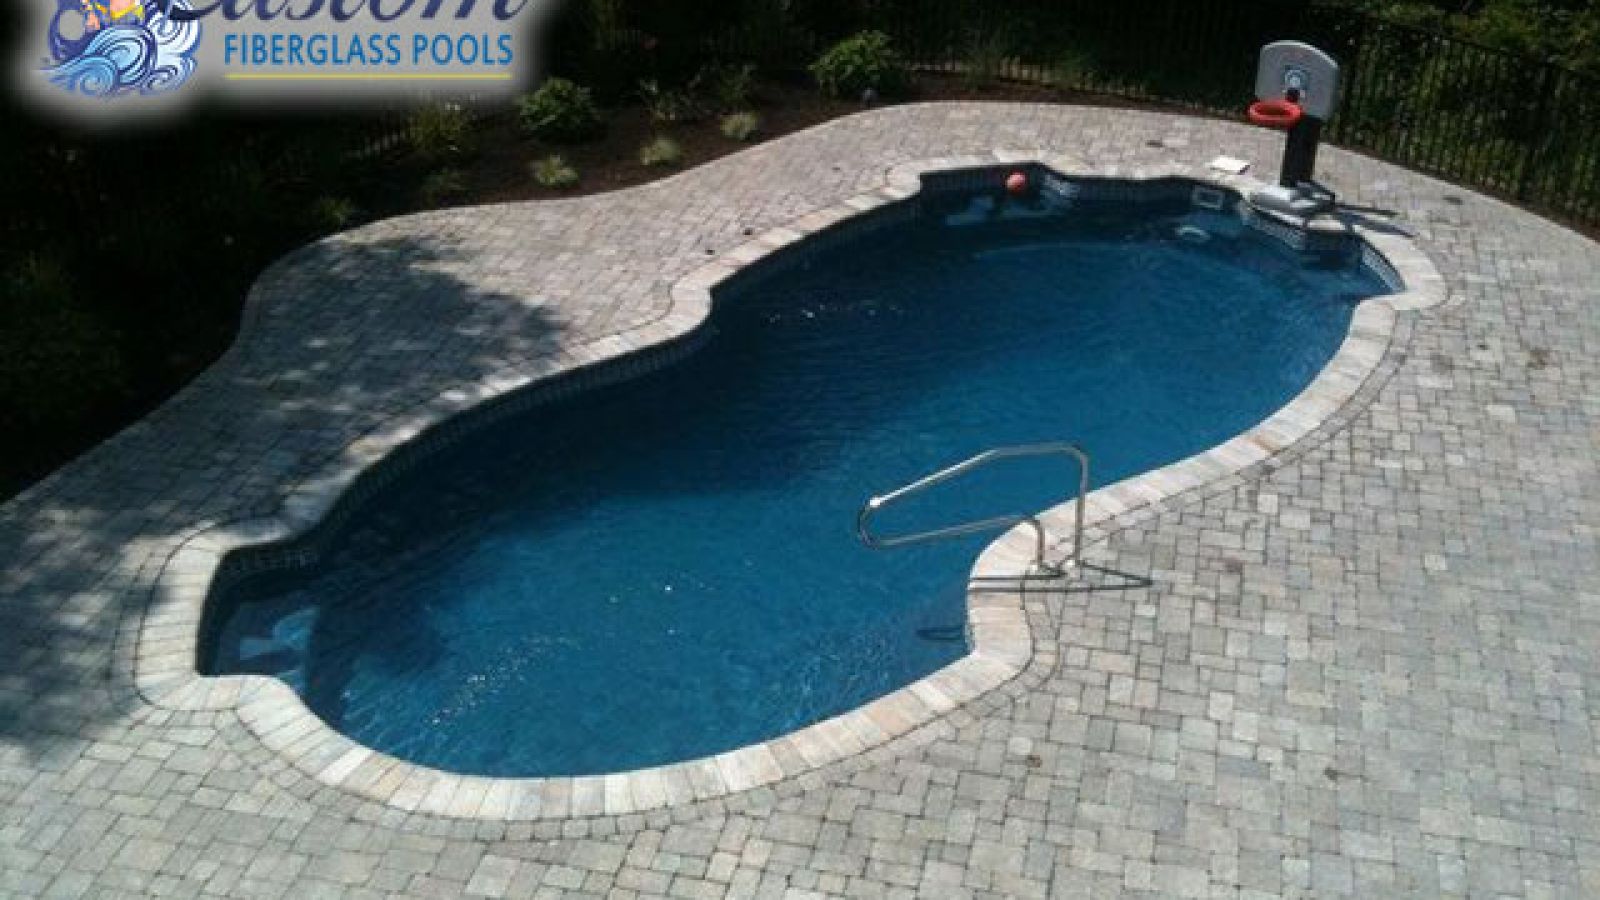 San Lucas Freeform Fiberglass Pool, a luxurious and inviting addition to a Clarksville, TN backyard